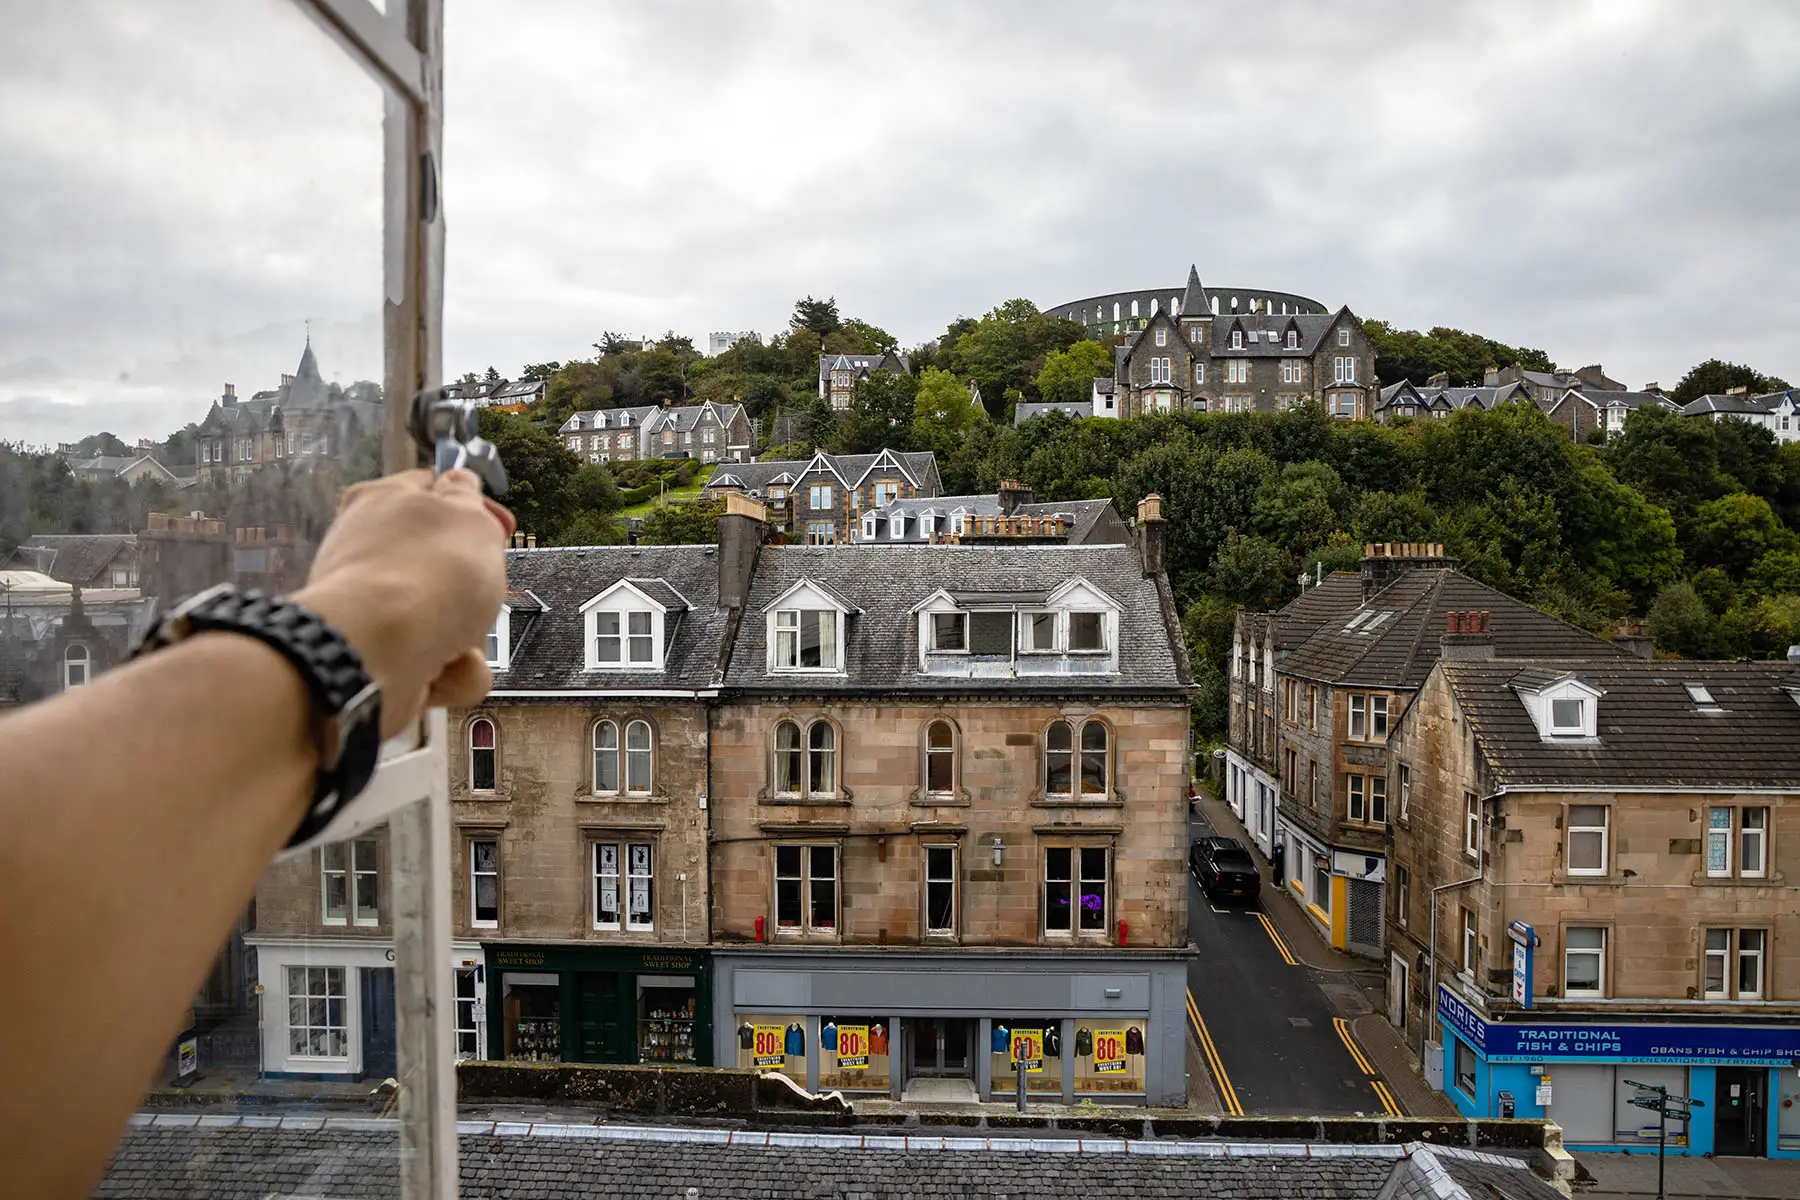 Person is opening a window to give a better view of the town of Oban, Scotland.